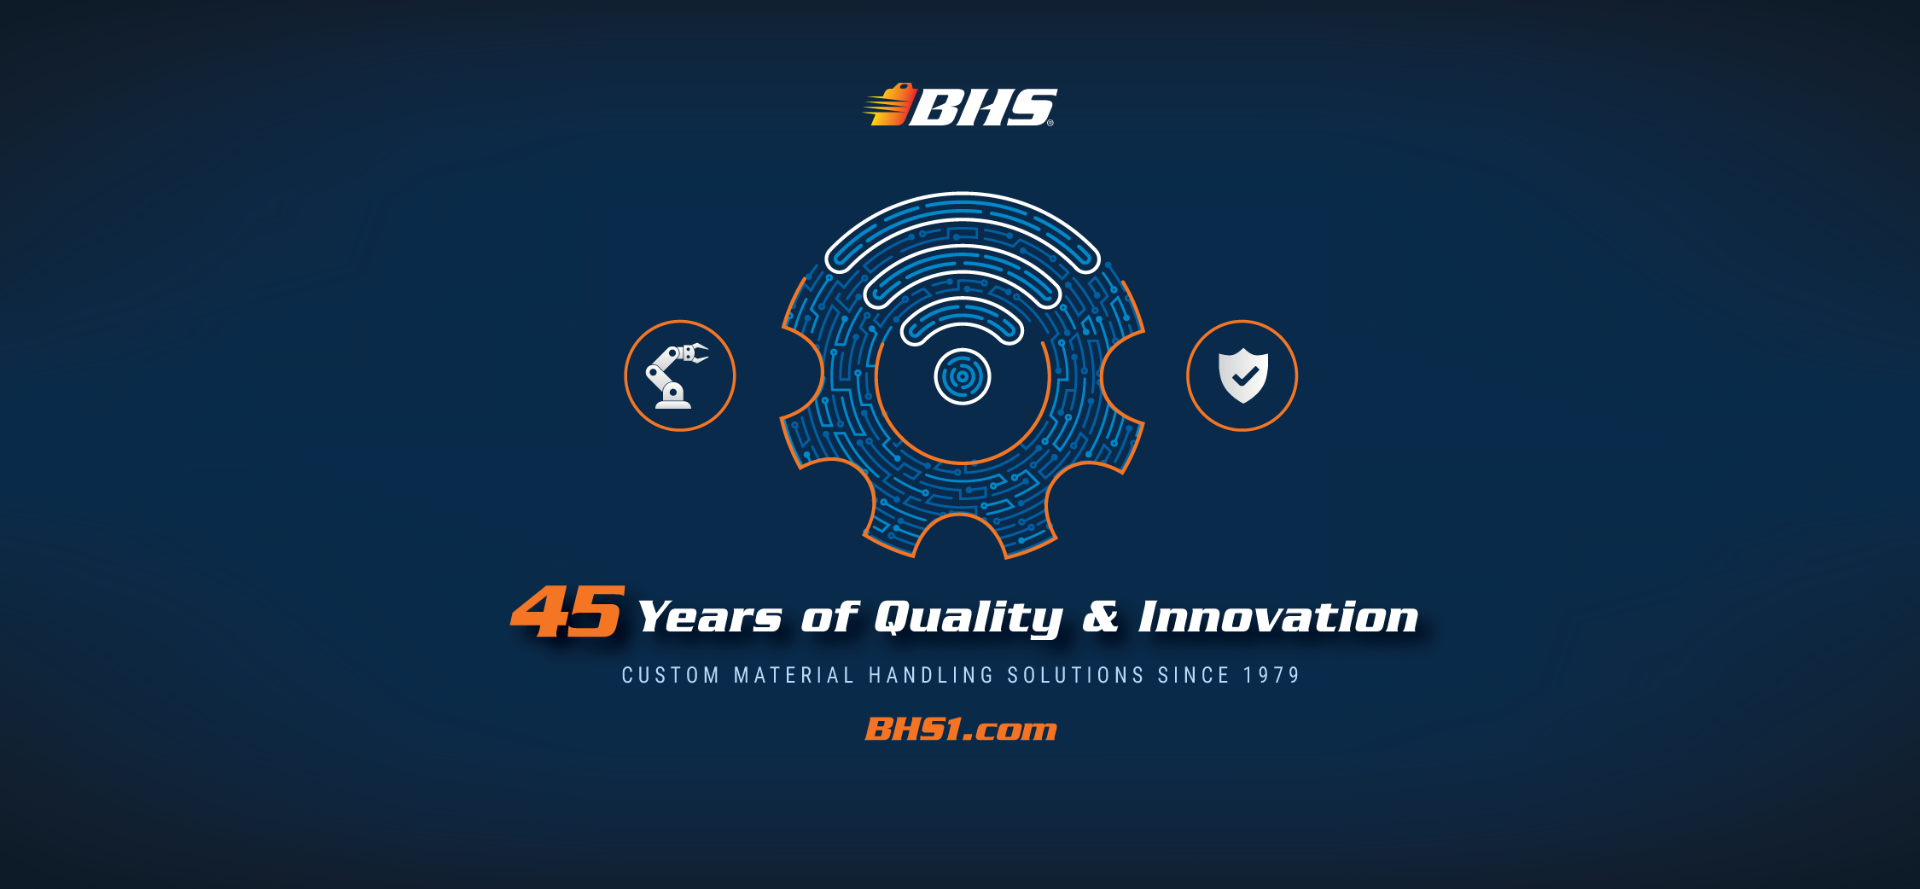 BHS, Inc. Celebrates 45 Years of Material Handling Innovation